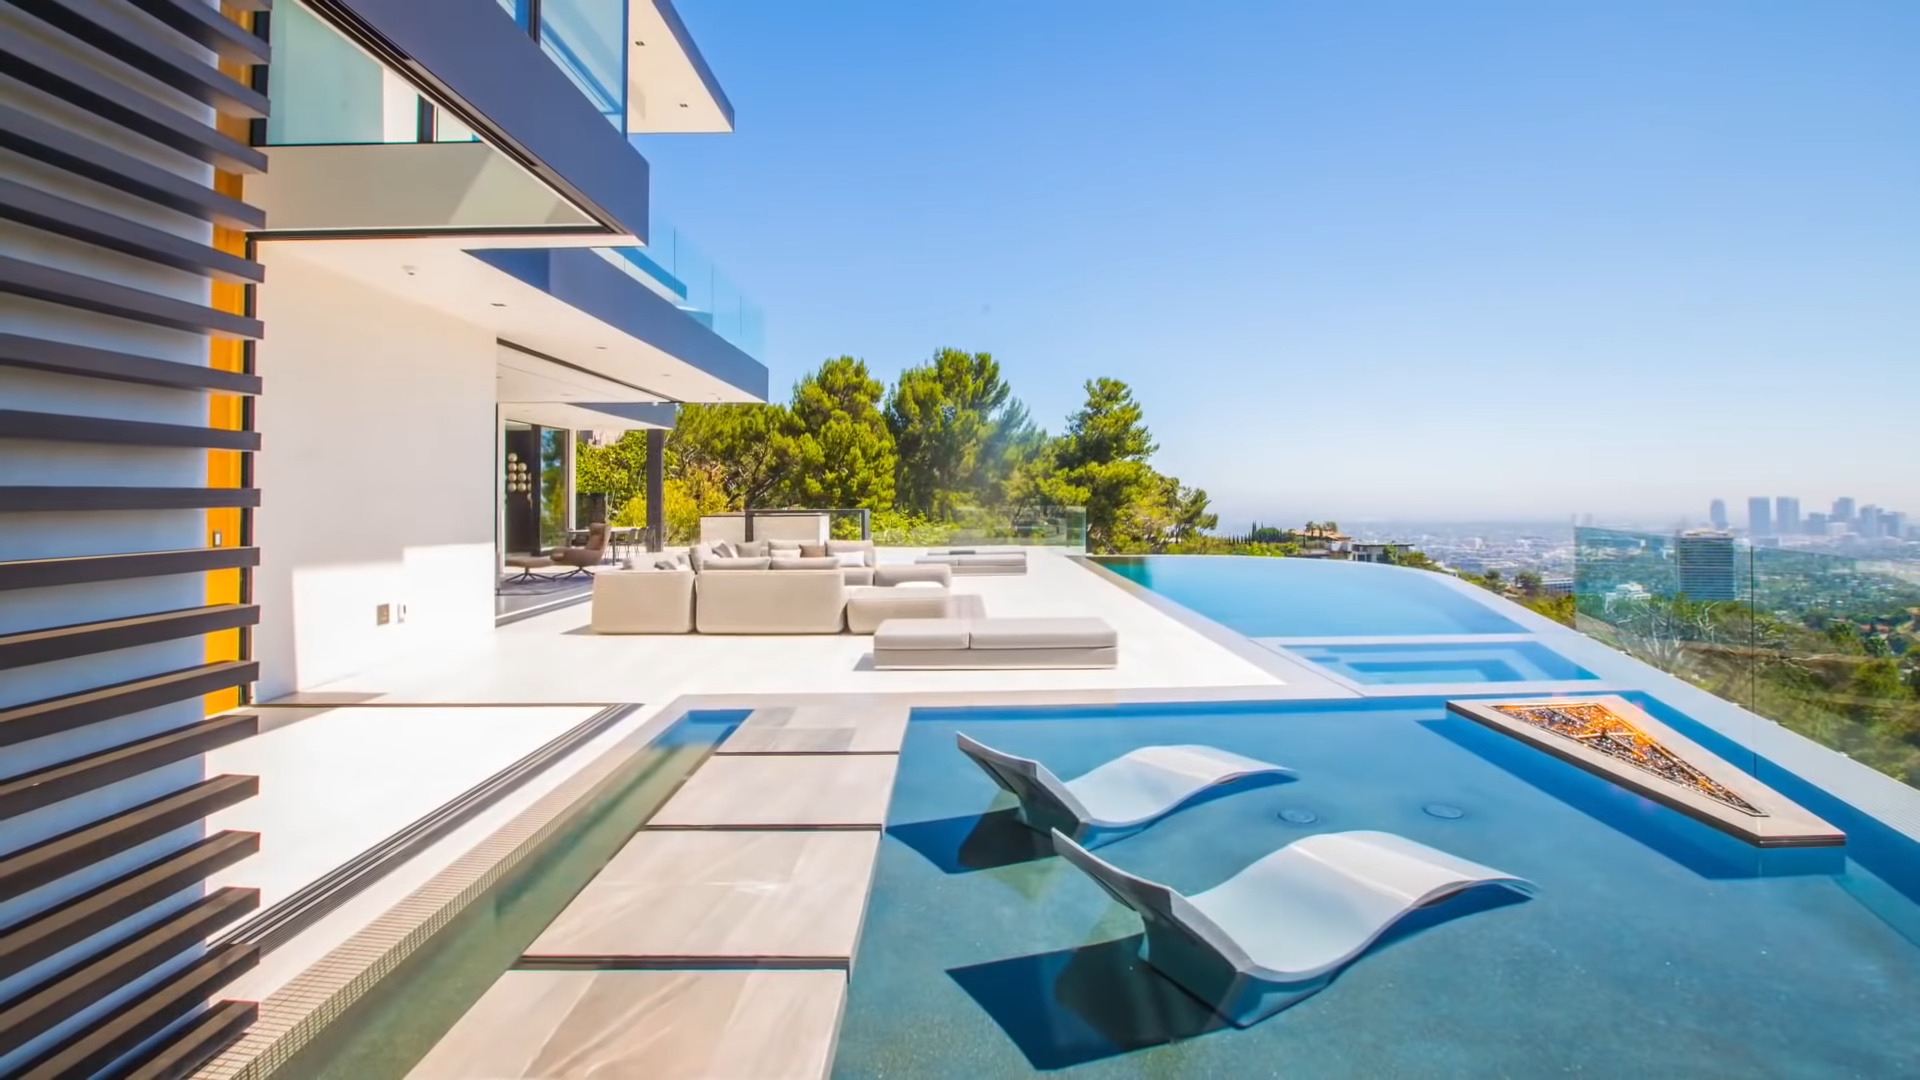 Fantastic modern home with infinity edge pool overlooking L.A.